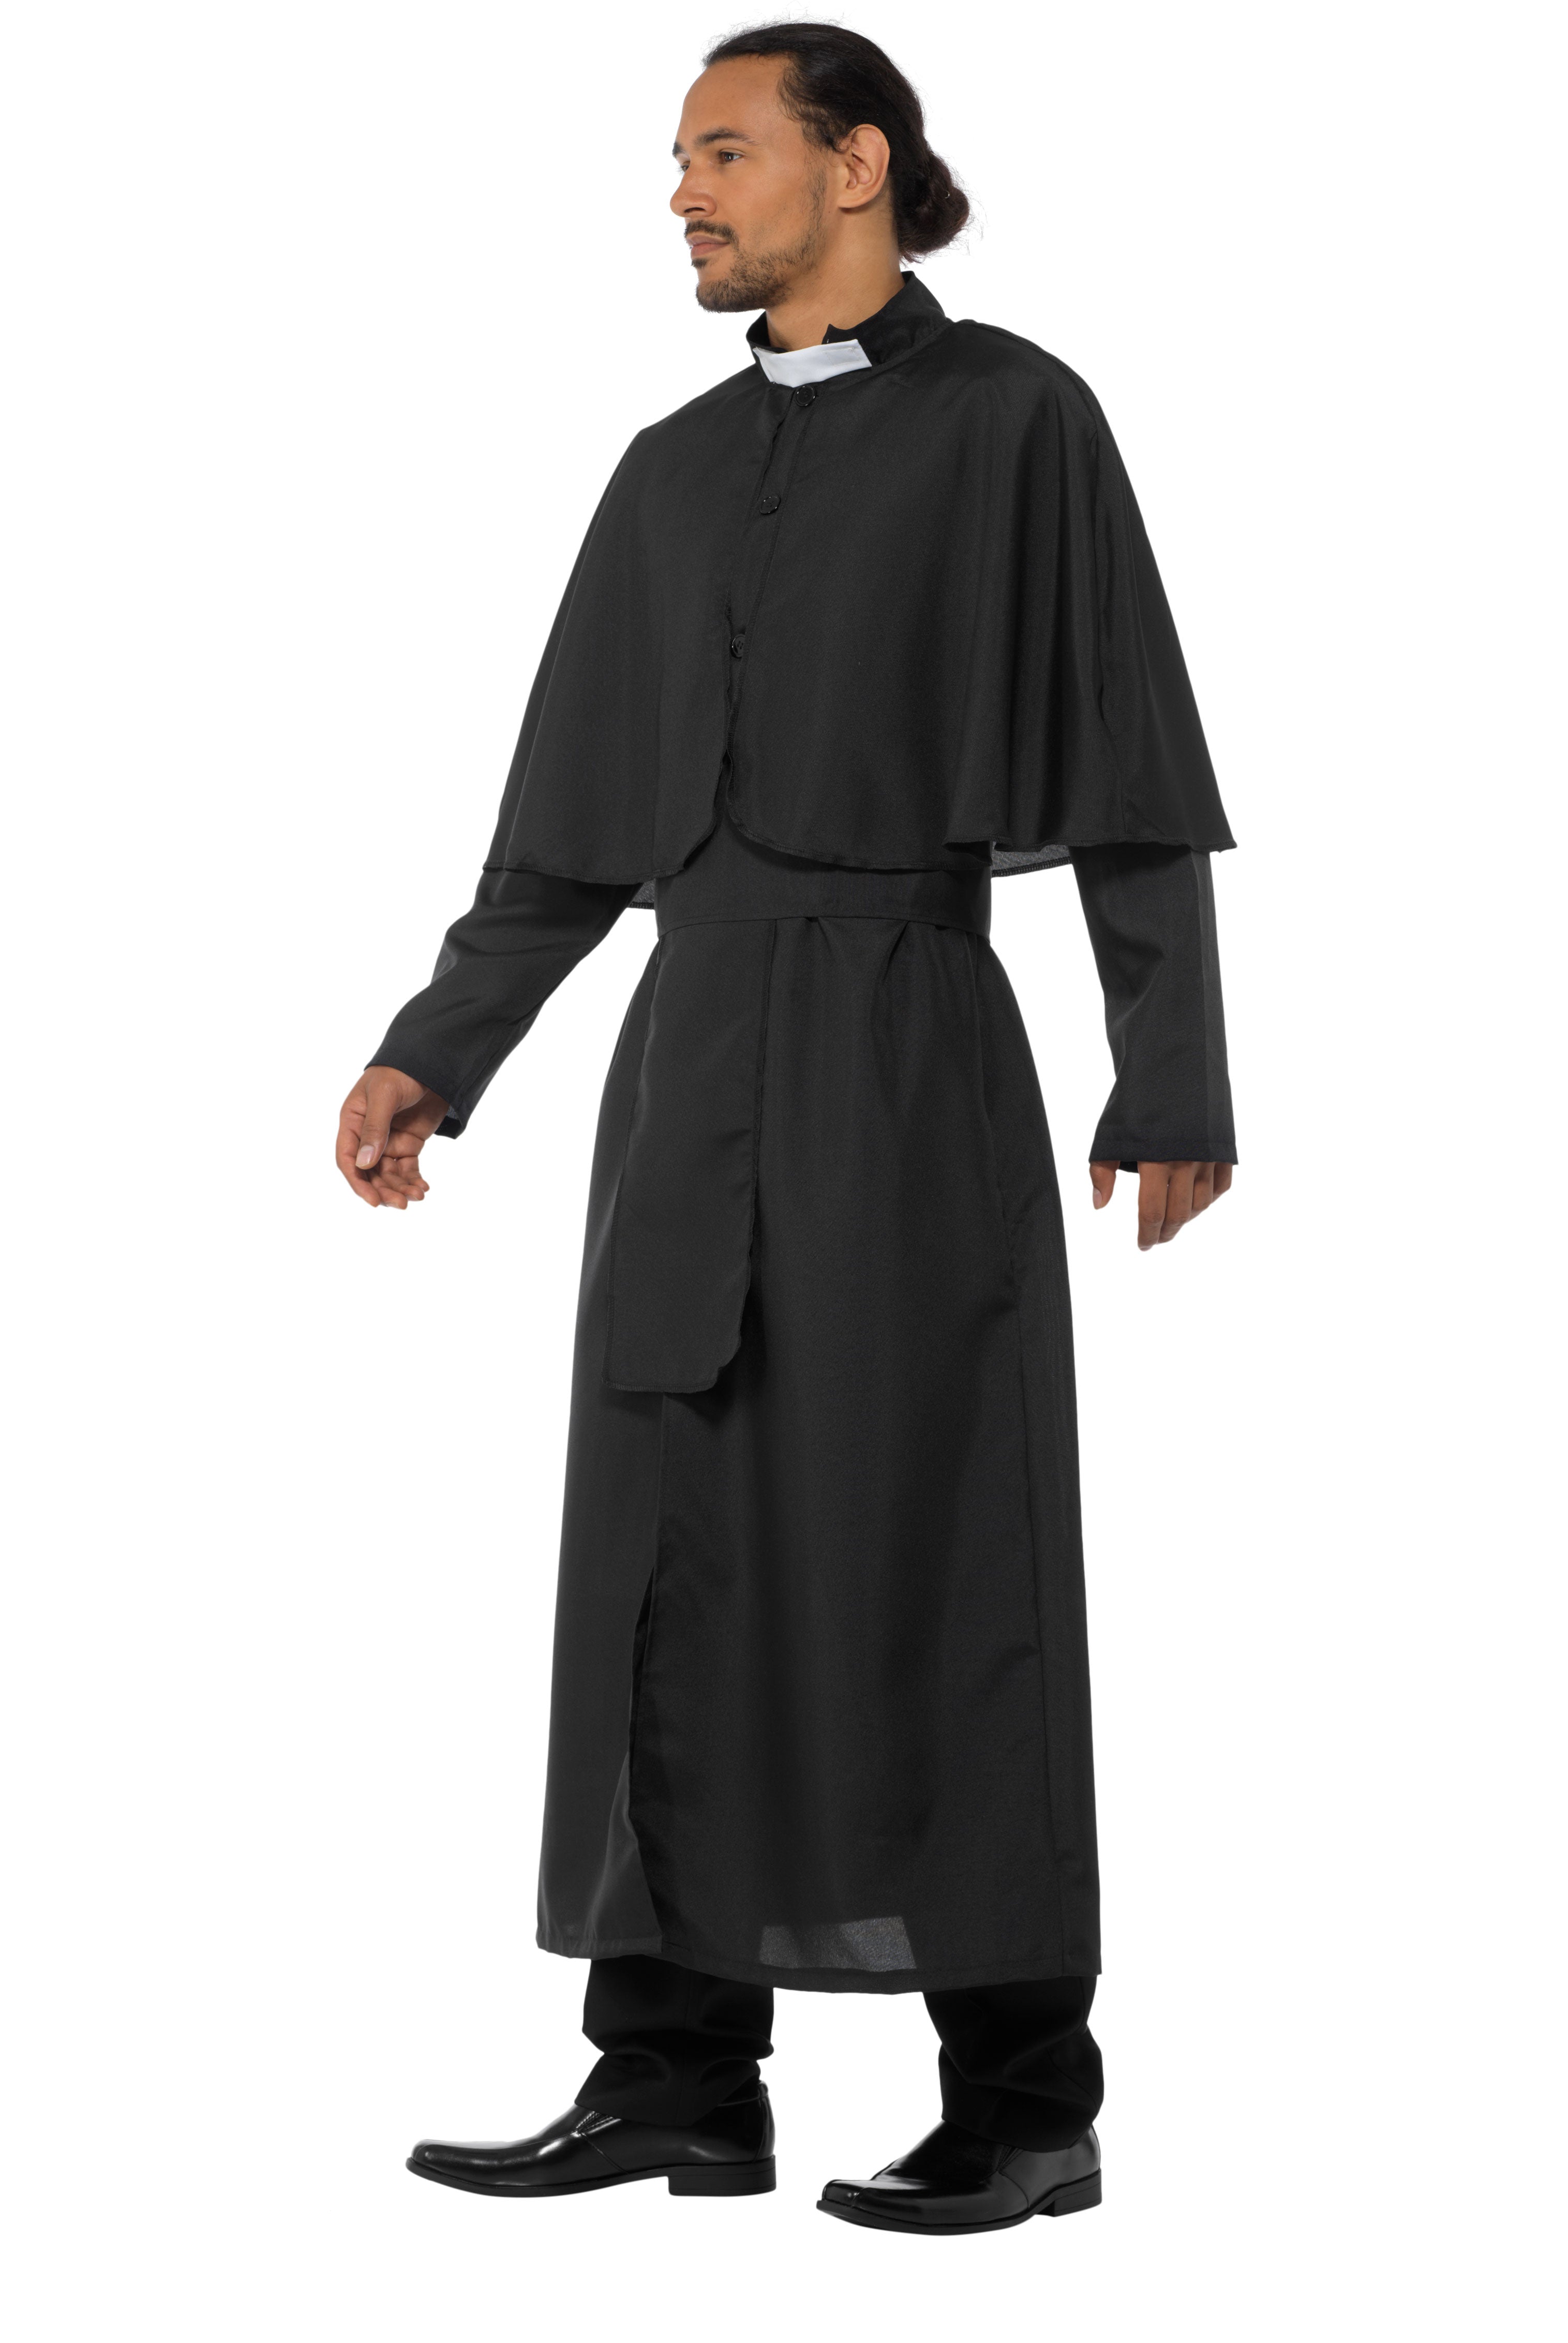 Deluxe Witch Hunter Priest Adult Costume